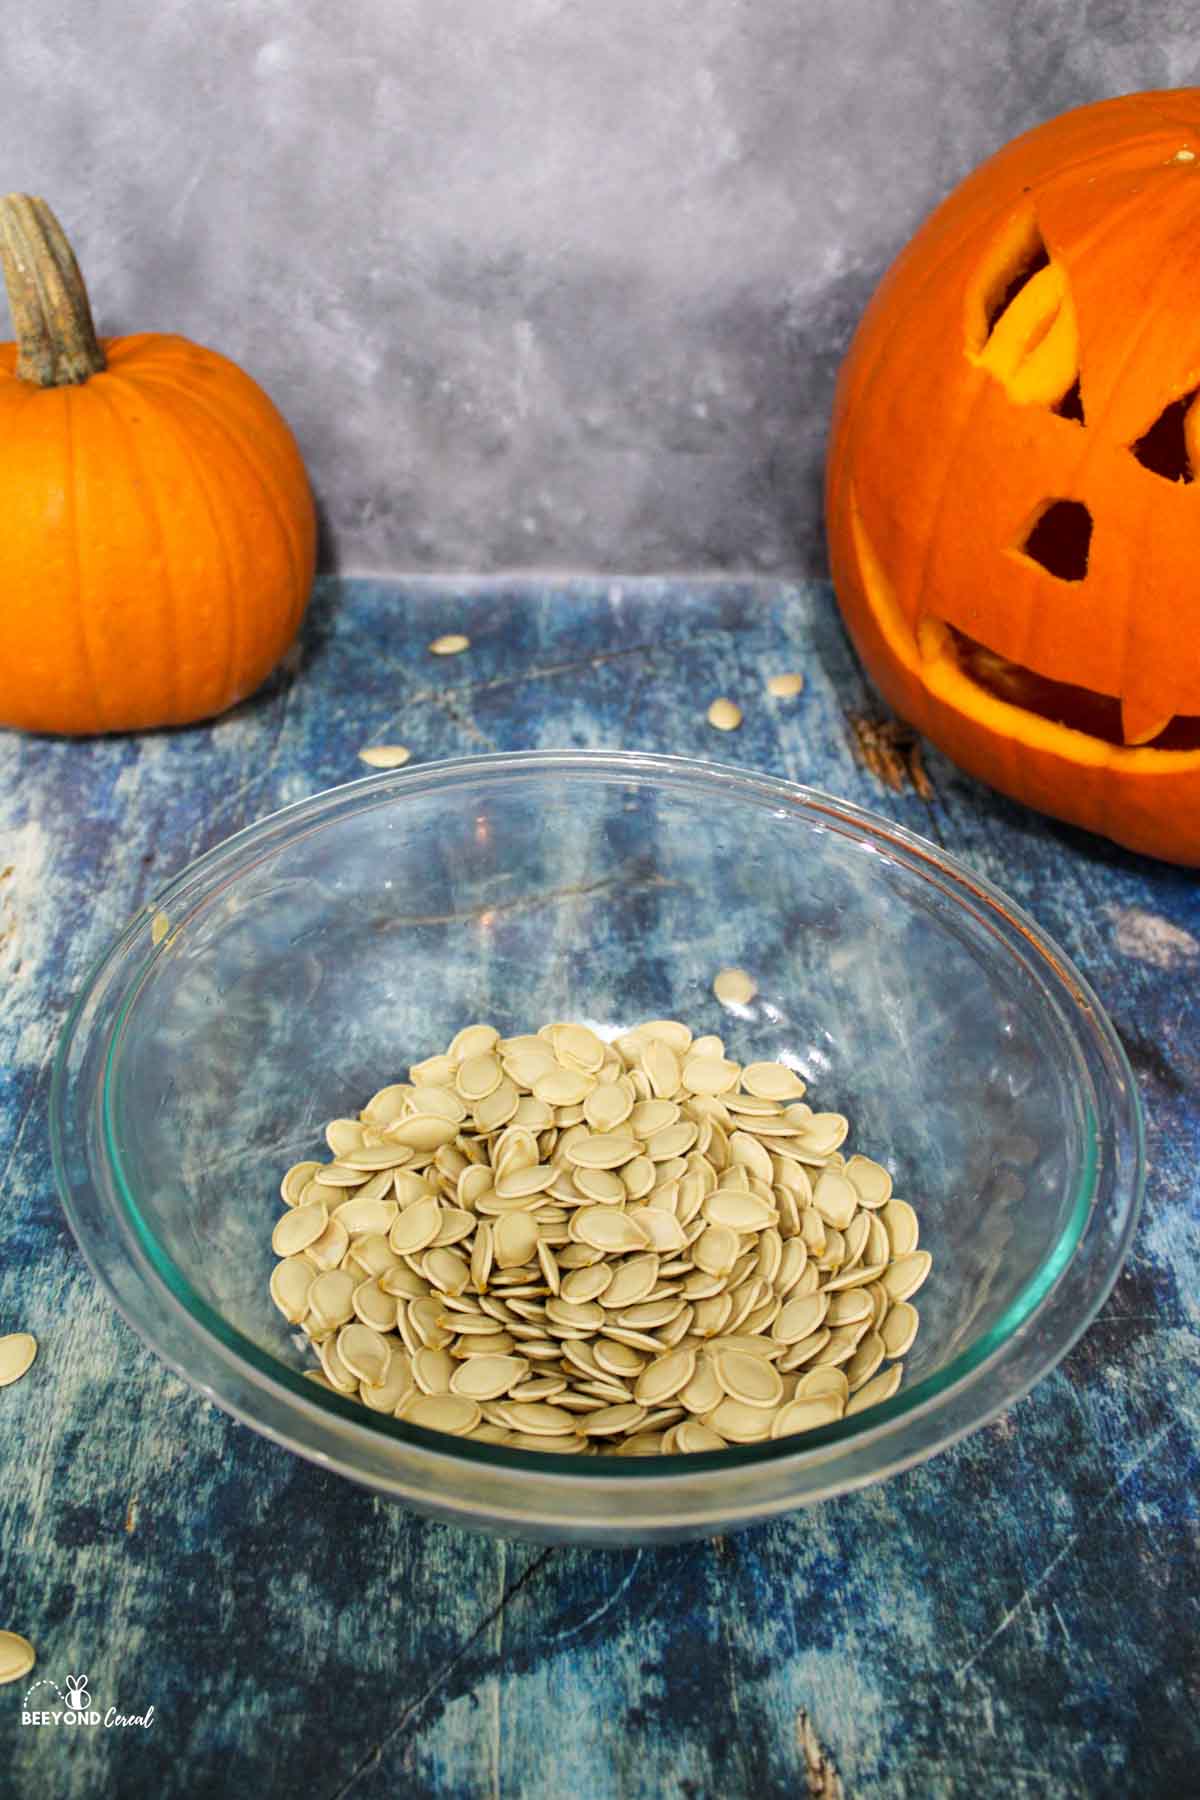 cleaned and dried pumpkin seeds in a glass bowl